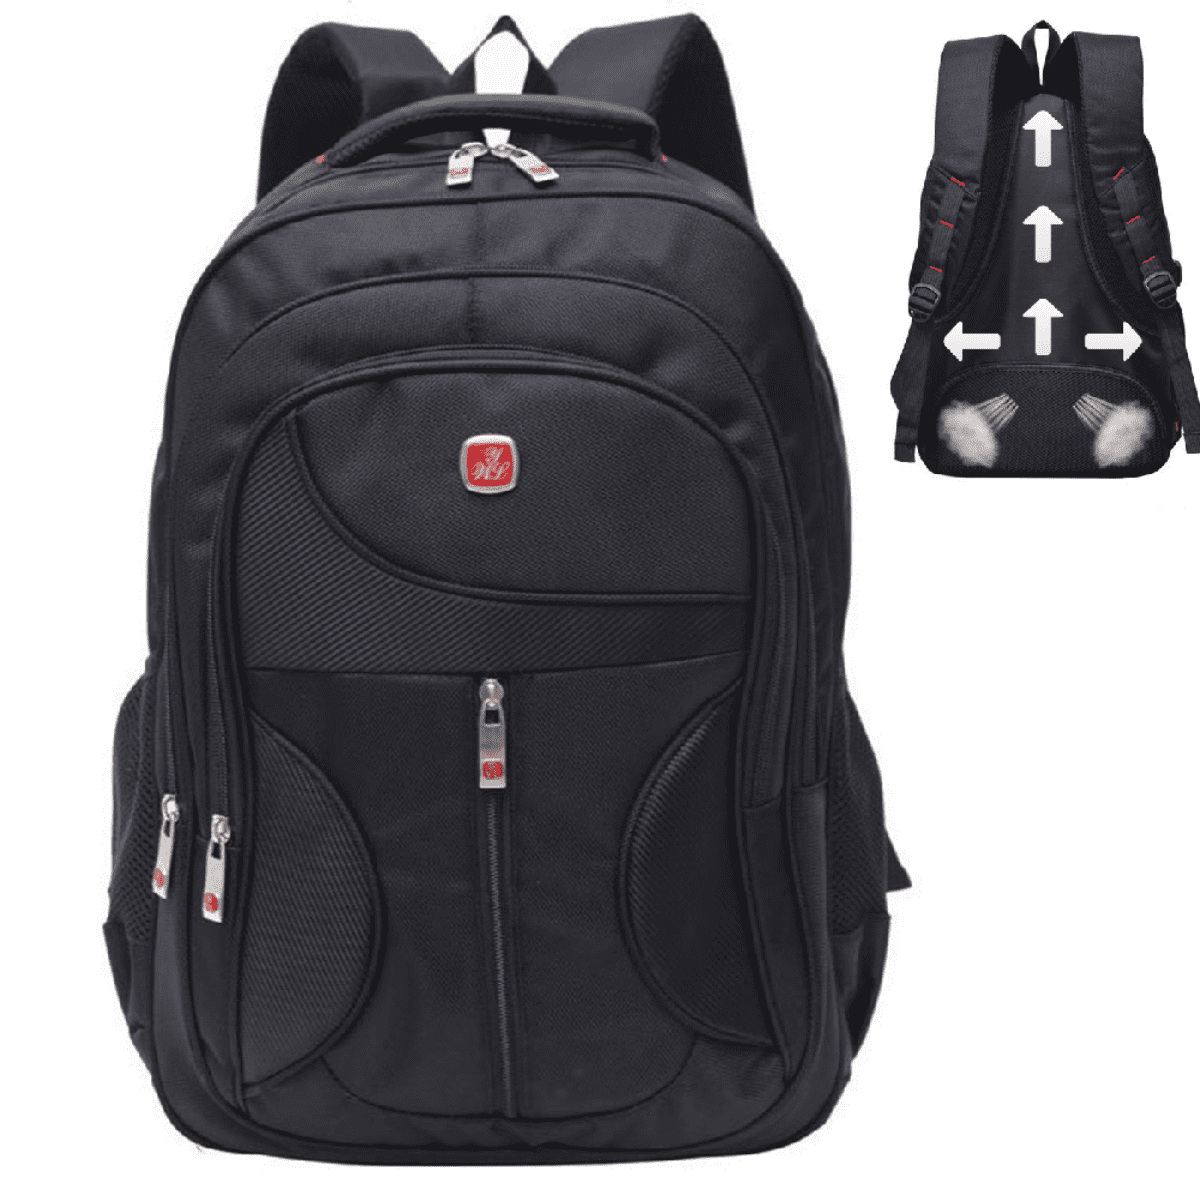 New Everest Quality Black Travel Backpack with Laptop Sleeve 17" Full Size Bag